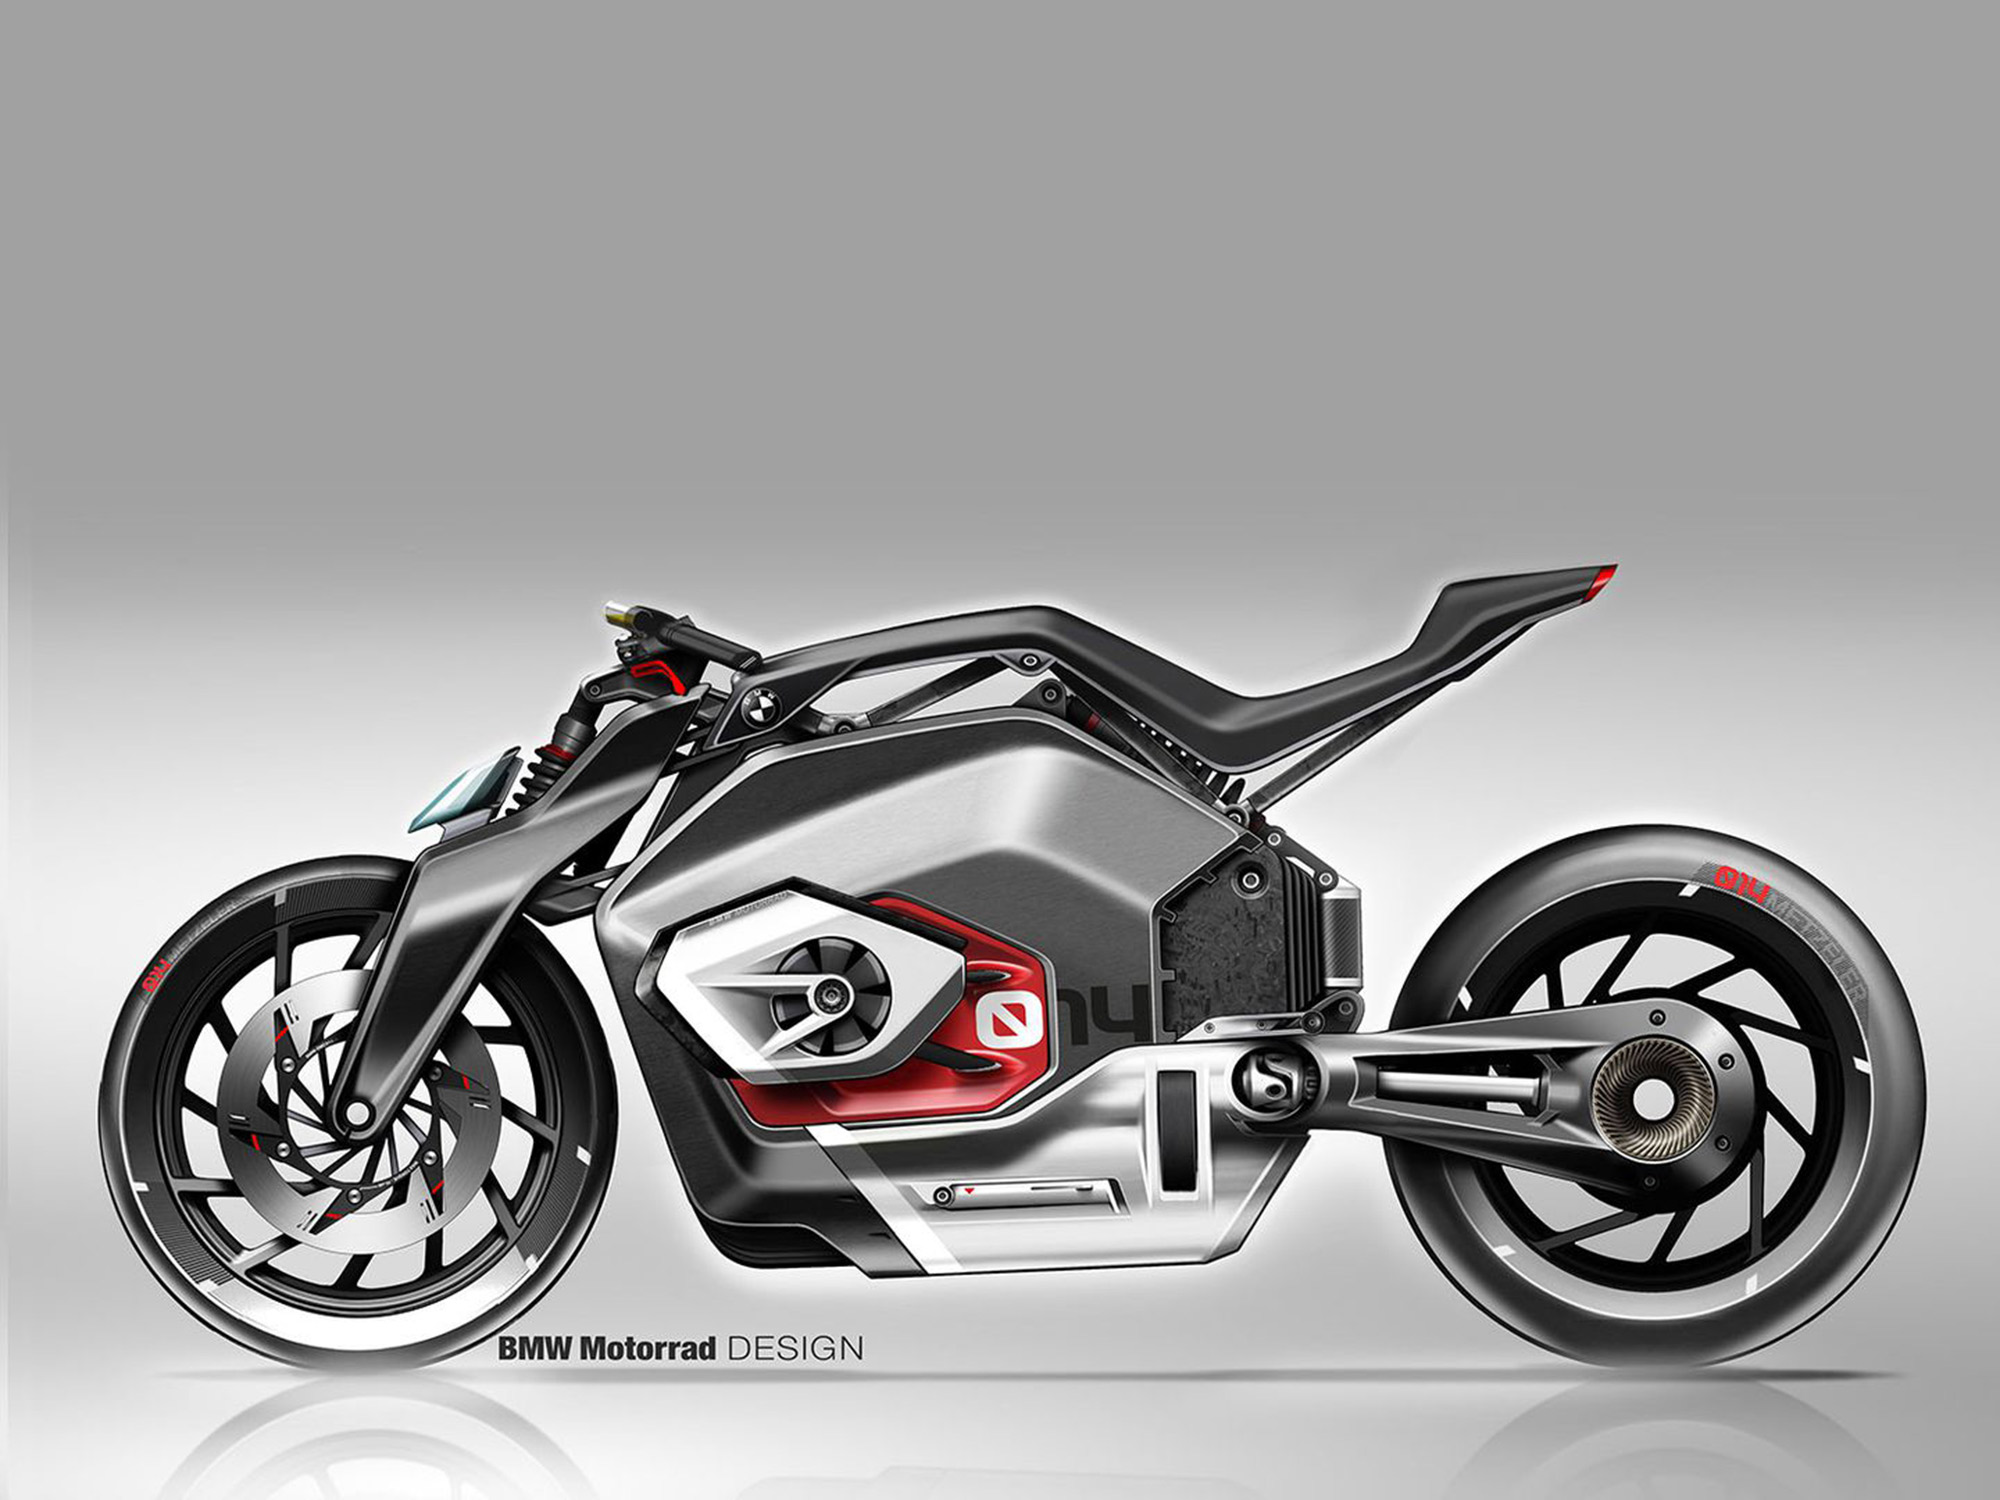 Bmw Shaft Driven Motorcycles Reviewmotors.co